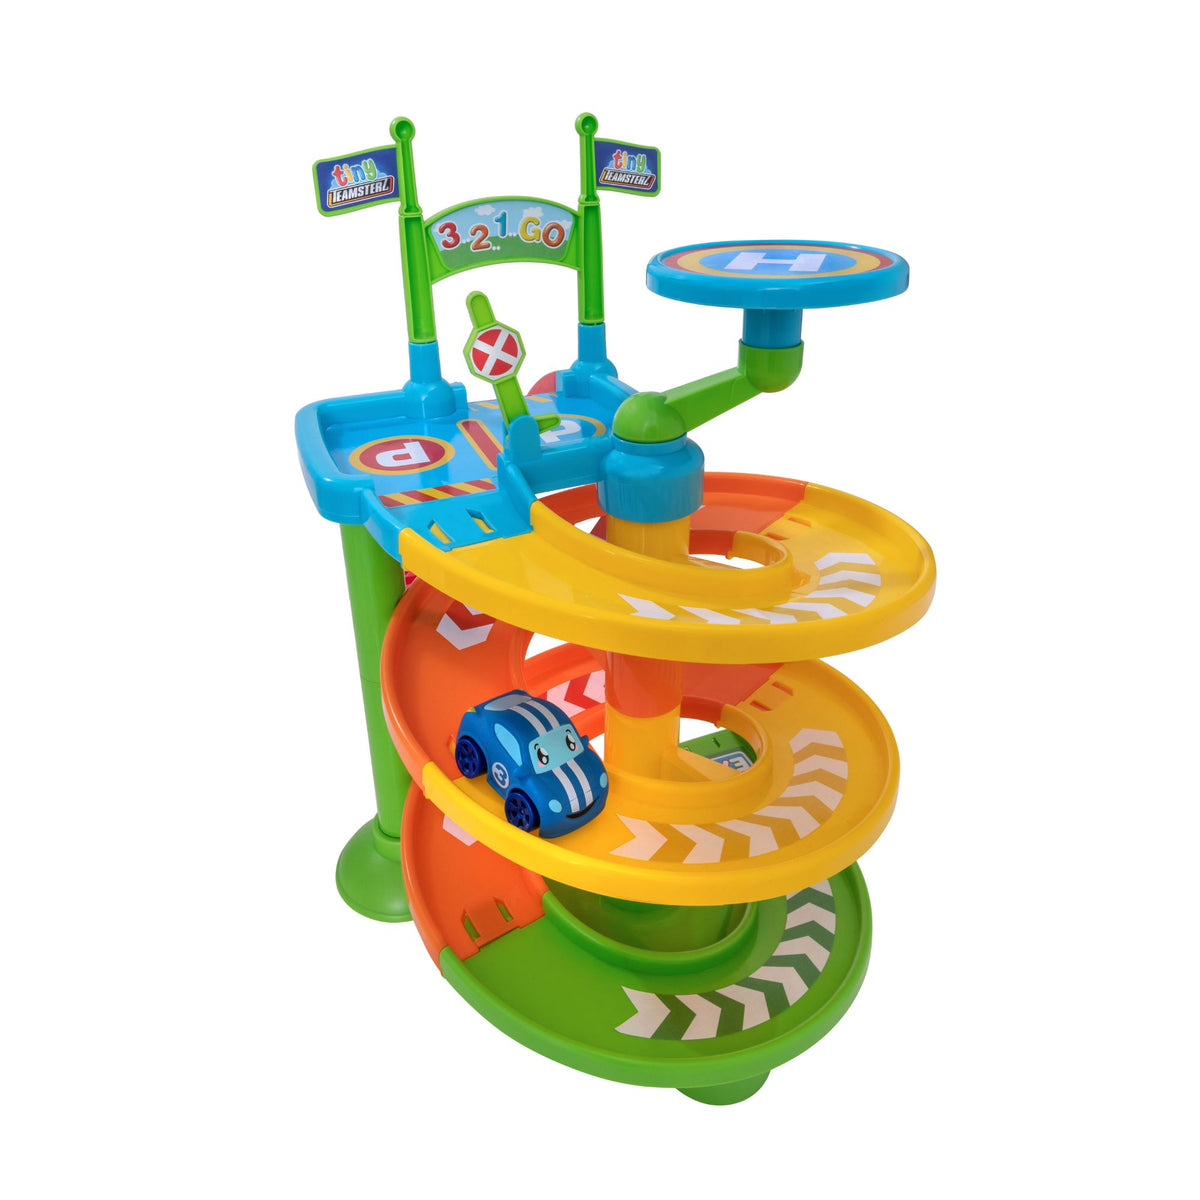 Tiny Teamsterz Spiral Raceway Launcher | Includes 1 Soft Touch Car